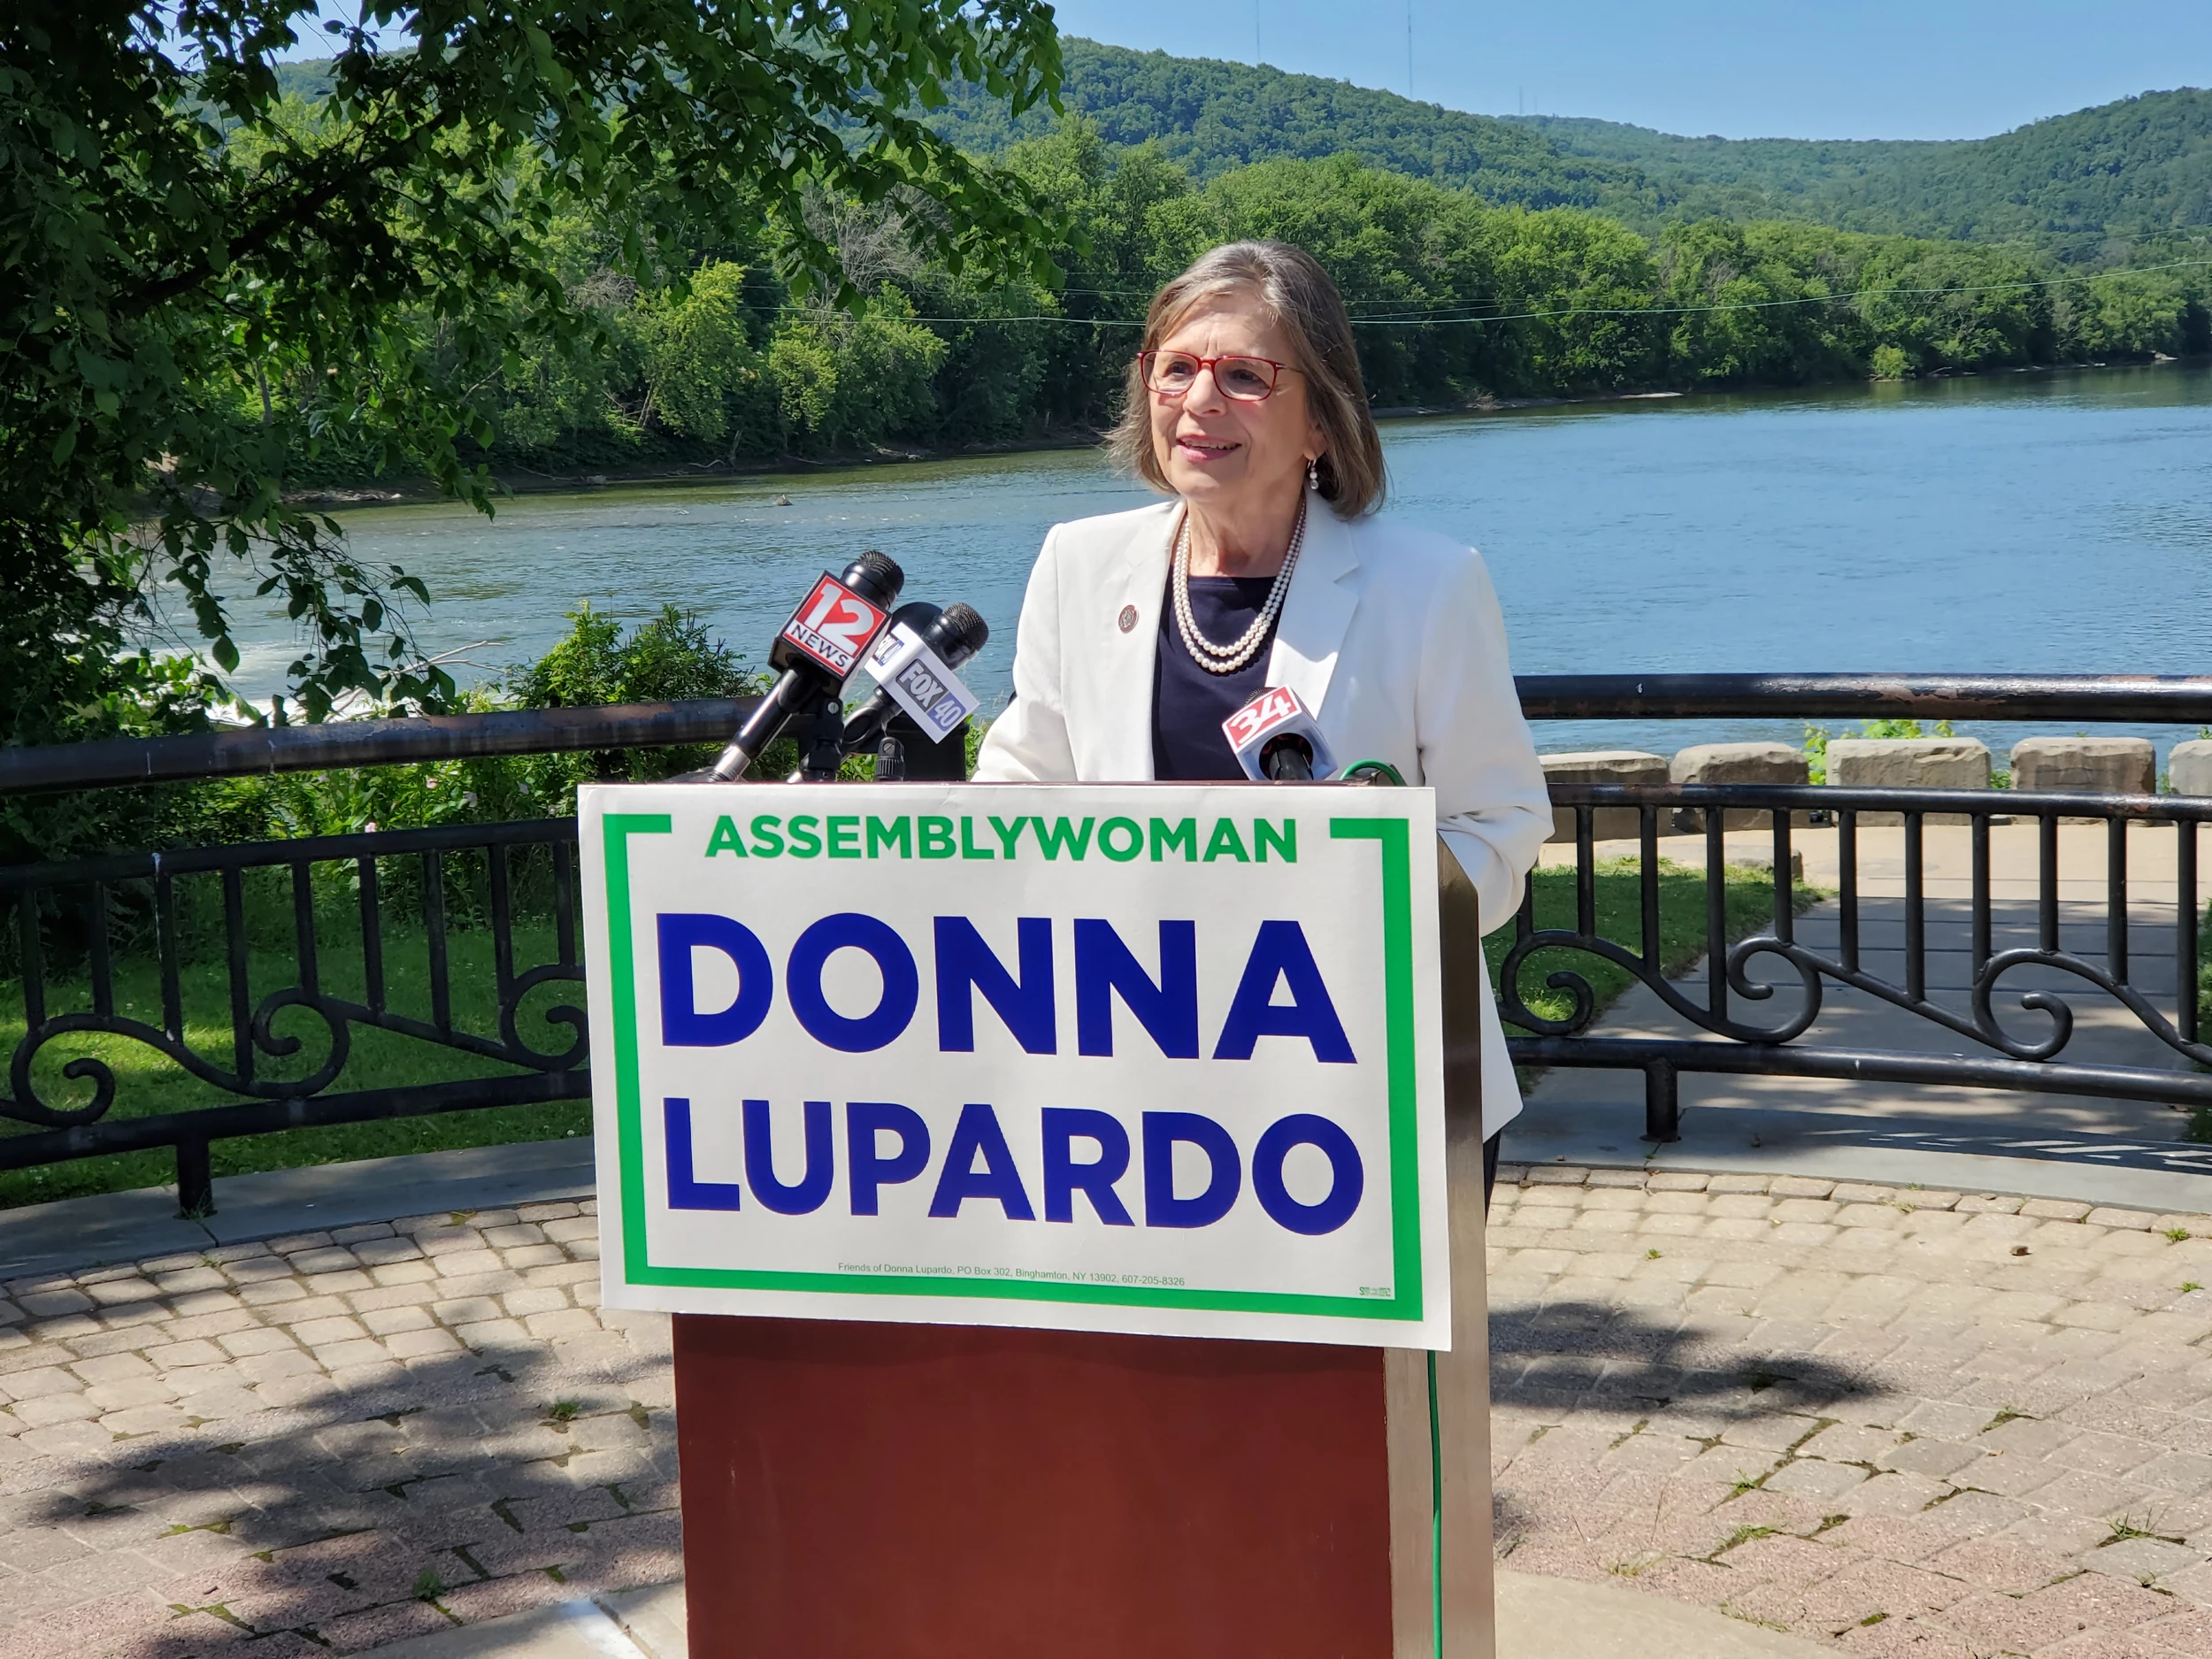 Lupardo Announces Shes Seeking Re-Election to State Assembly